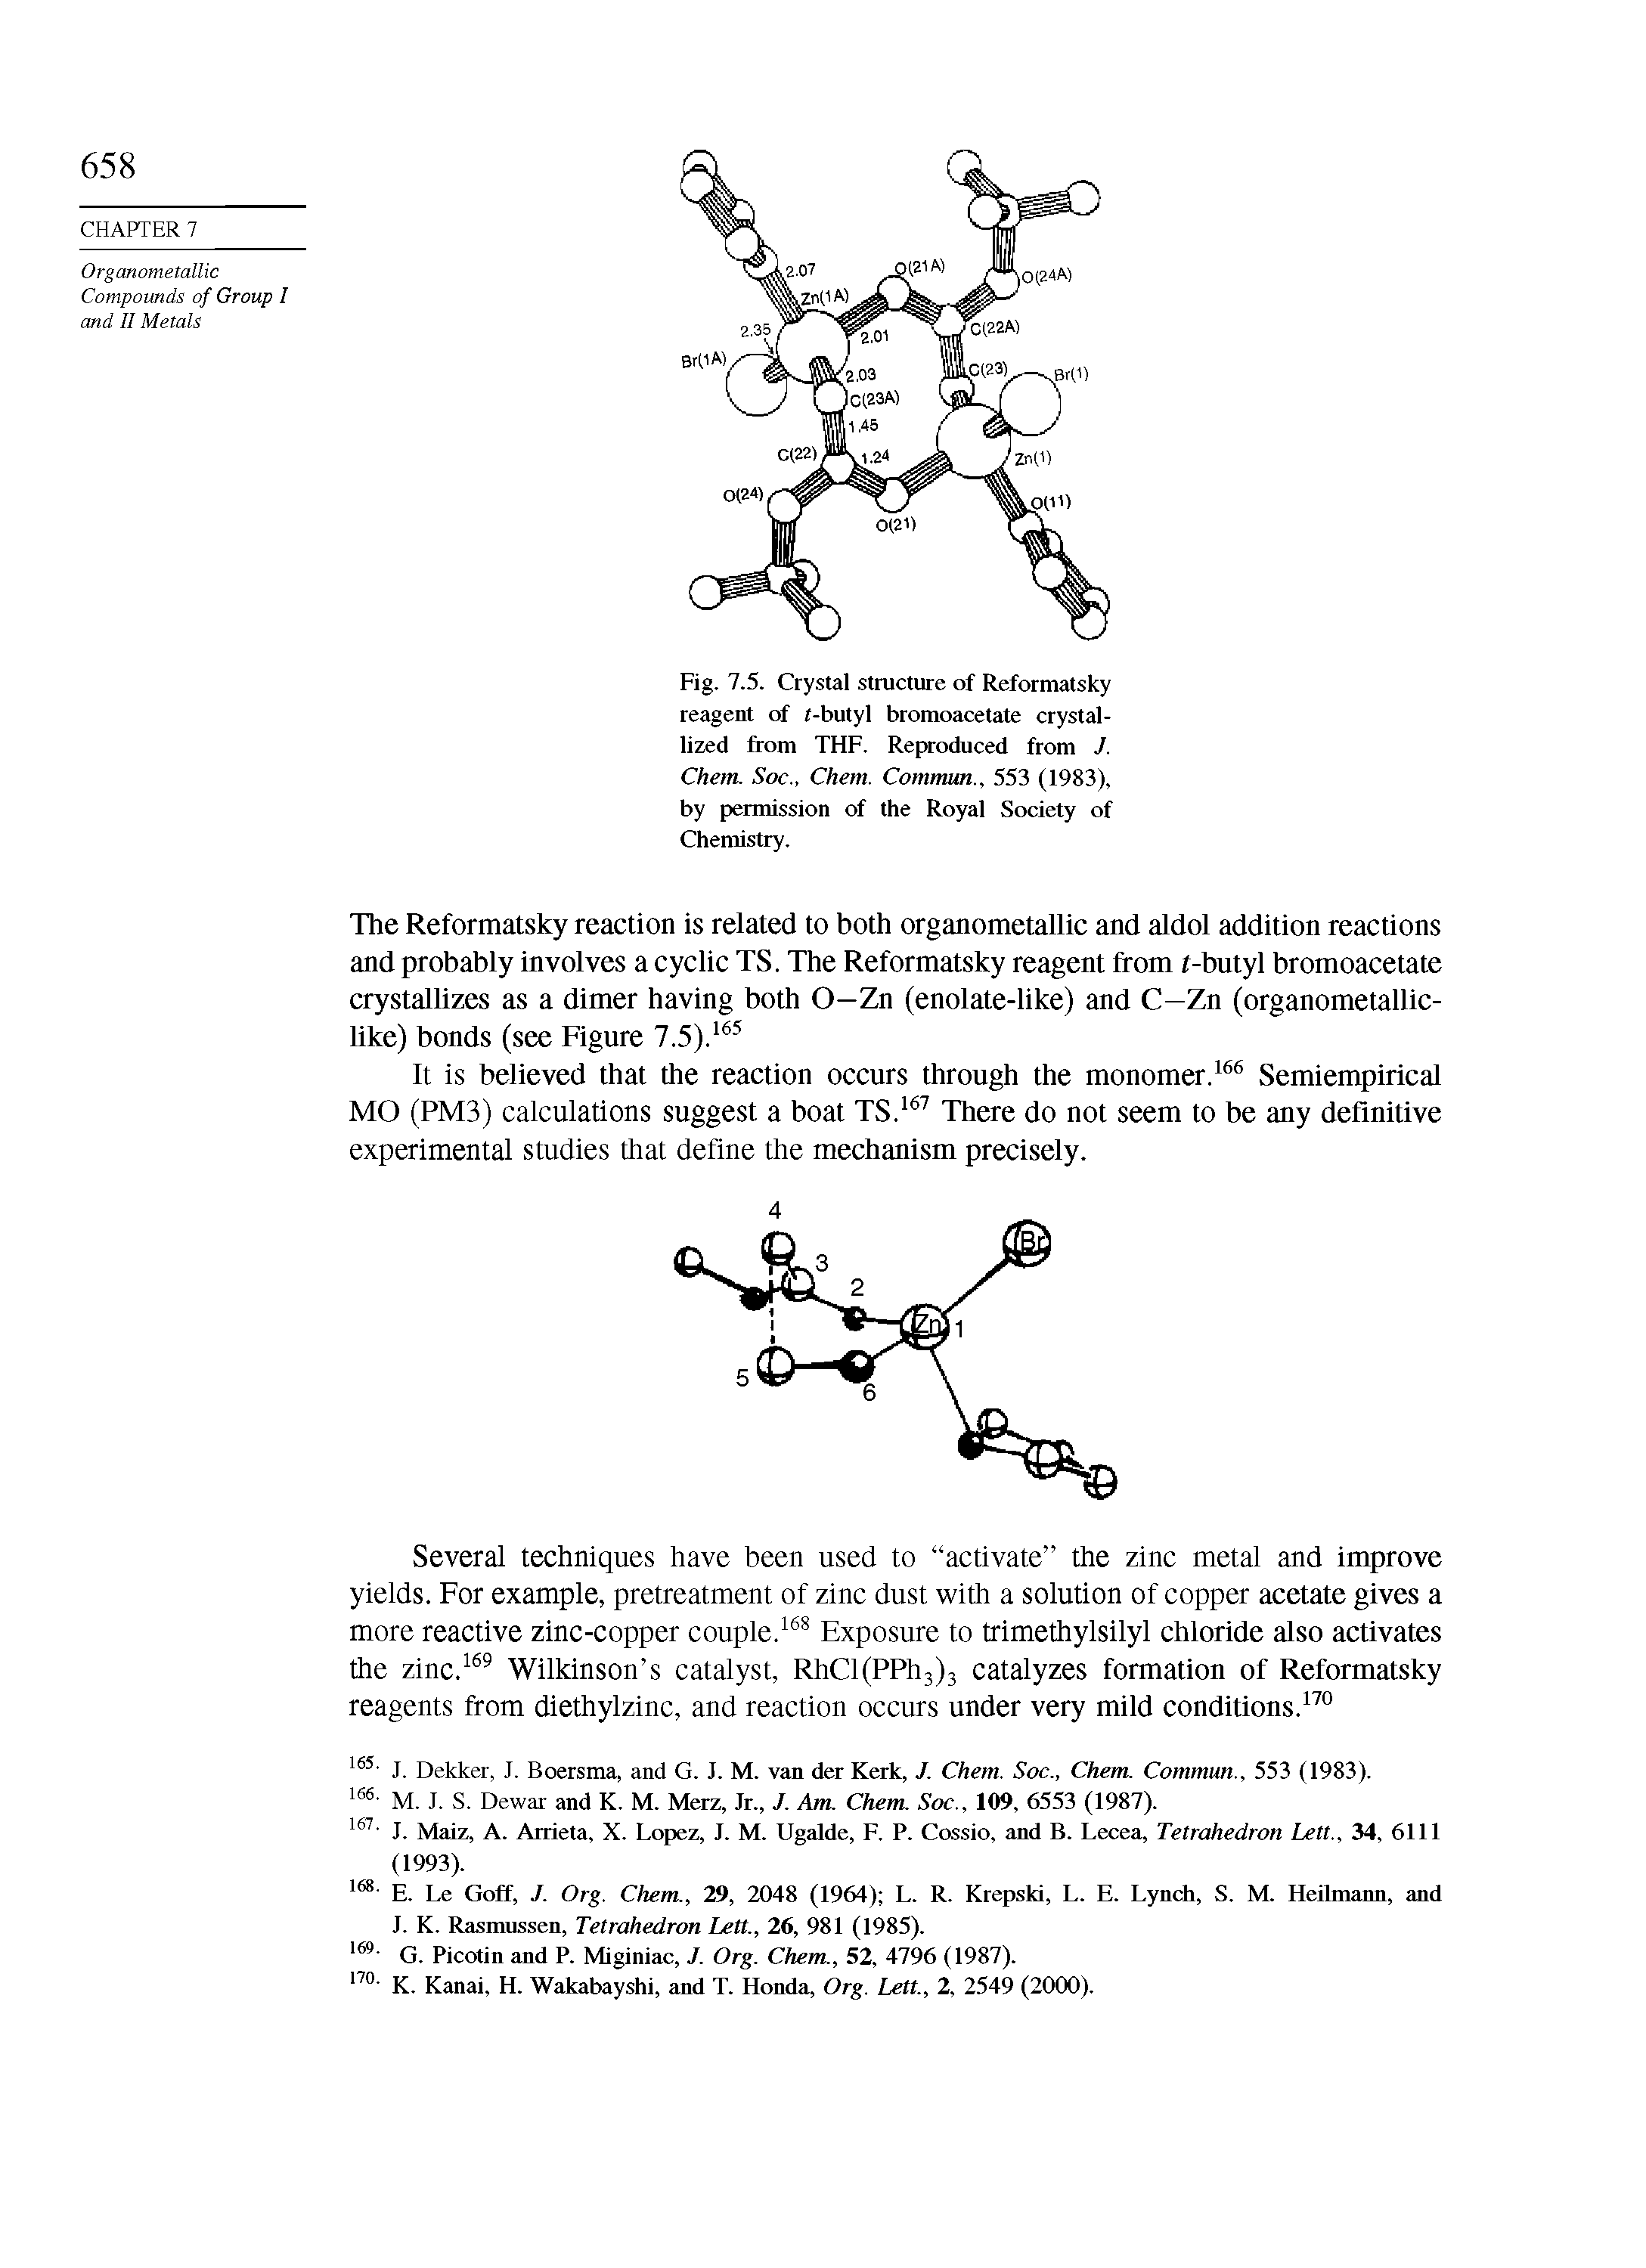 Fig. 7.5. Crystal structure of Reformatsky reagent of (-butyl bromoacetate crystallized from THF. Reproduced from J. Chem. Soc., Chem. Commun., 553 (1983), by permission of the Royal Society of Chemistry.